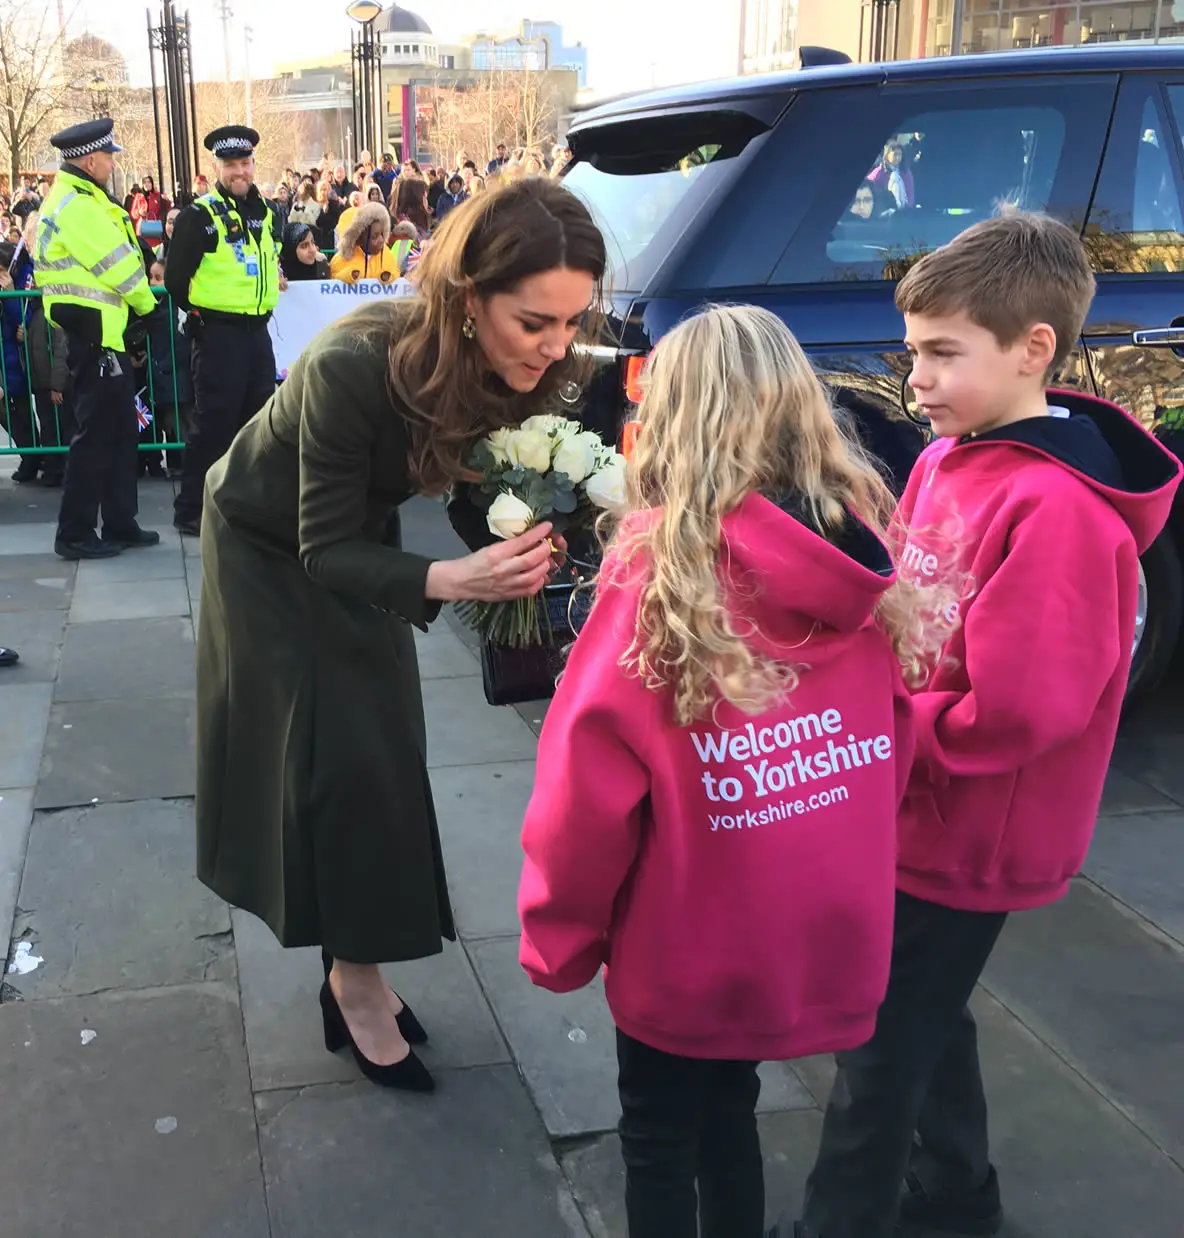 The Duke and Duchess of Cambridge started the decade with a visit to Bradford